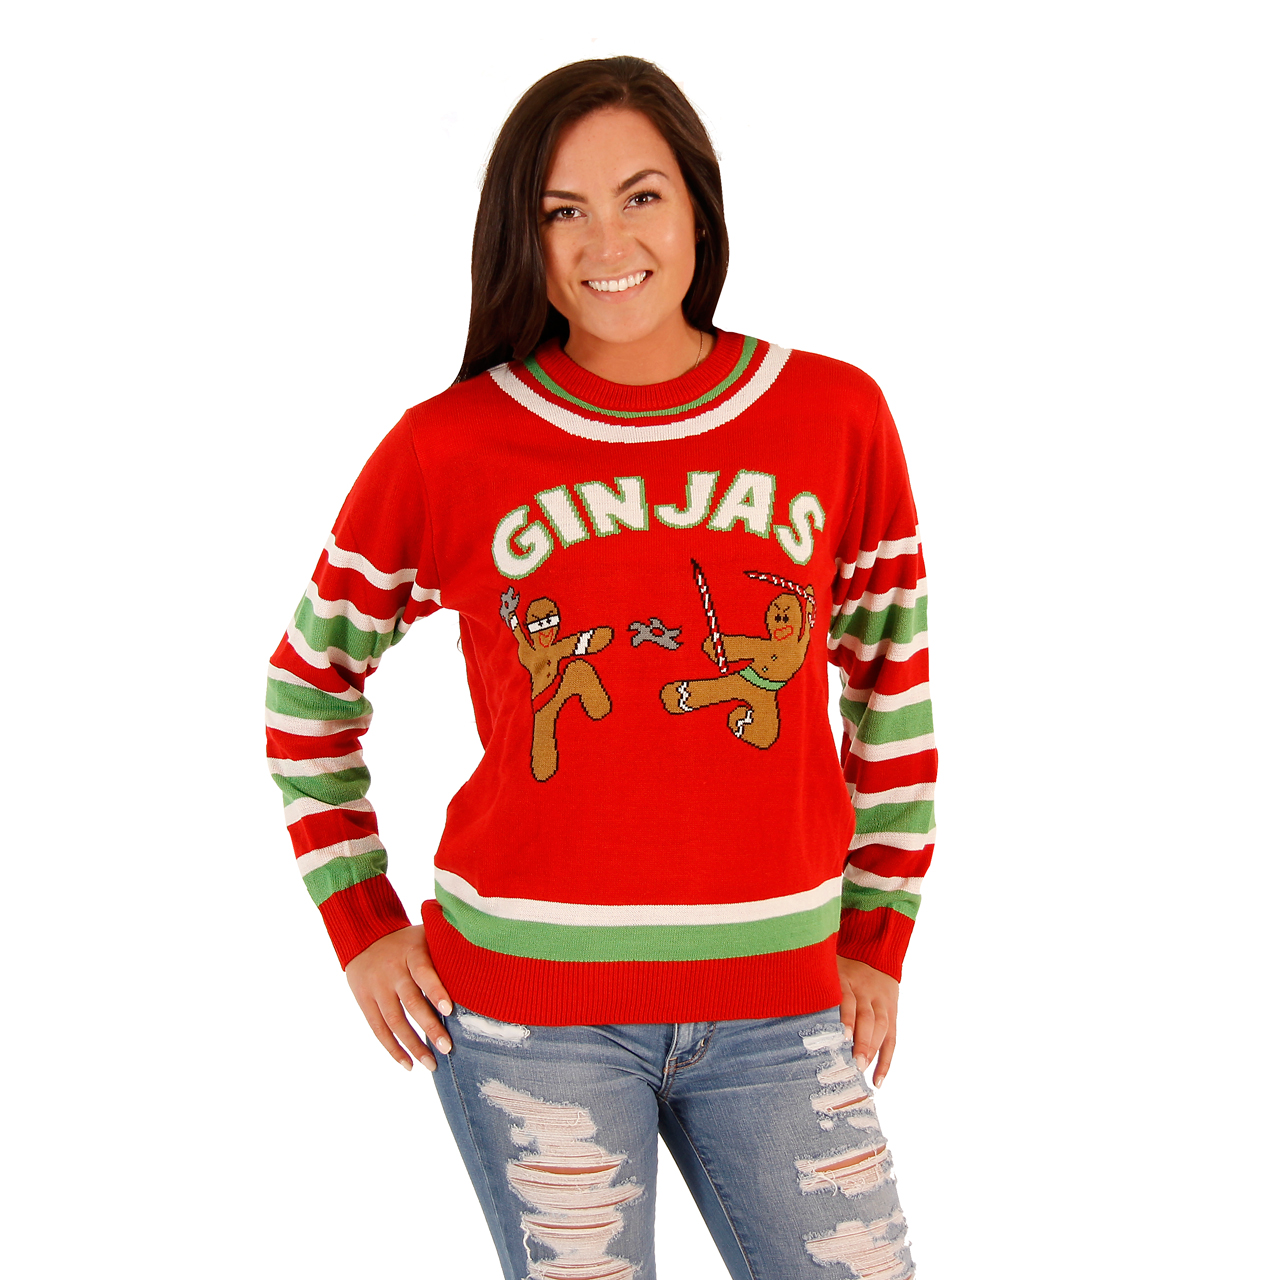 Women’s Fighting Ginjas Gingerbread Ninjas Funny Christmas Sweater,New Products : uglyschristmassweater.com